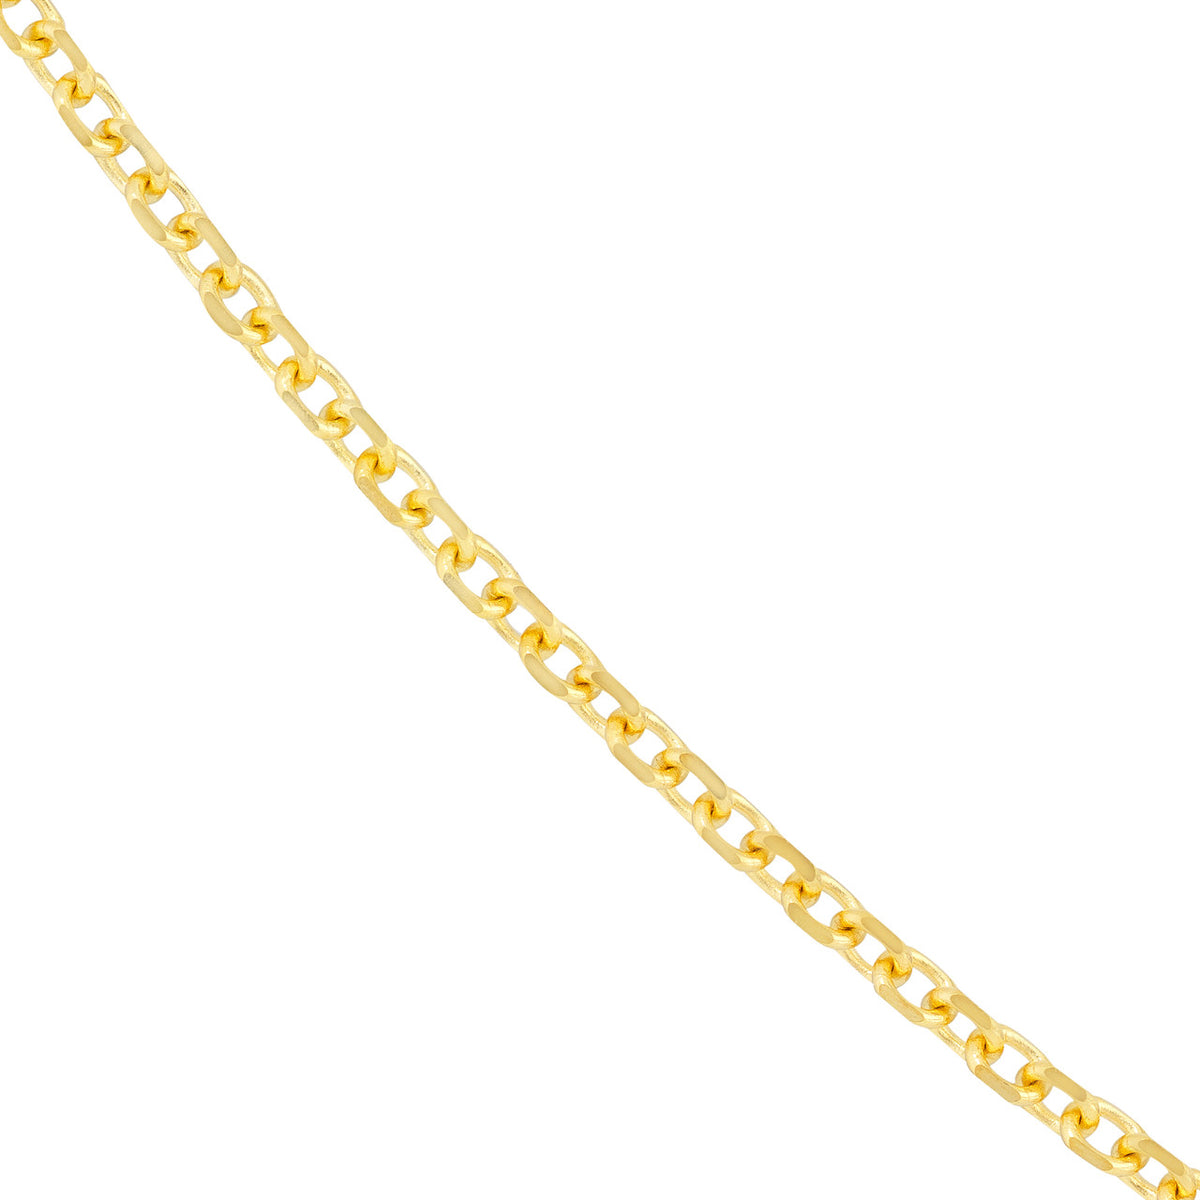 14K Yellow Gold or White Gold 2.3mm D/C Cable Chain Necklace with Lobster Lock